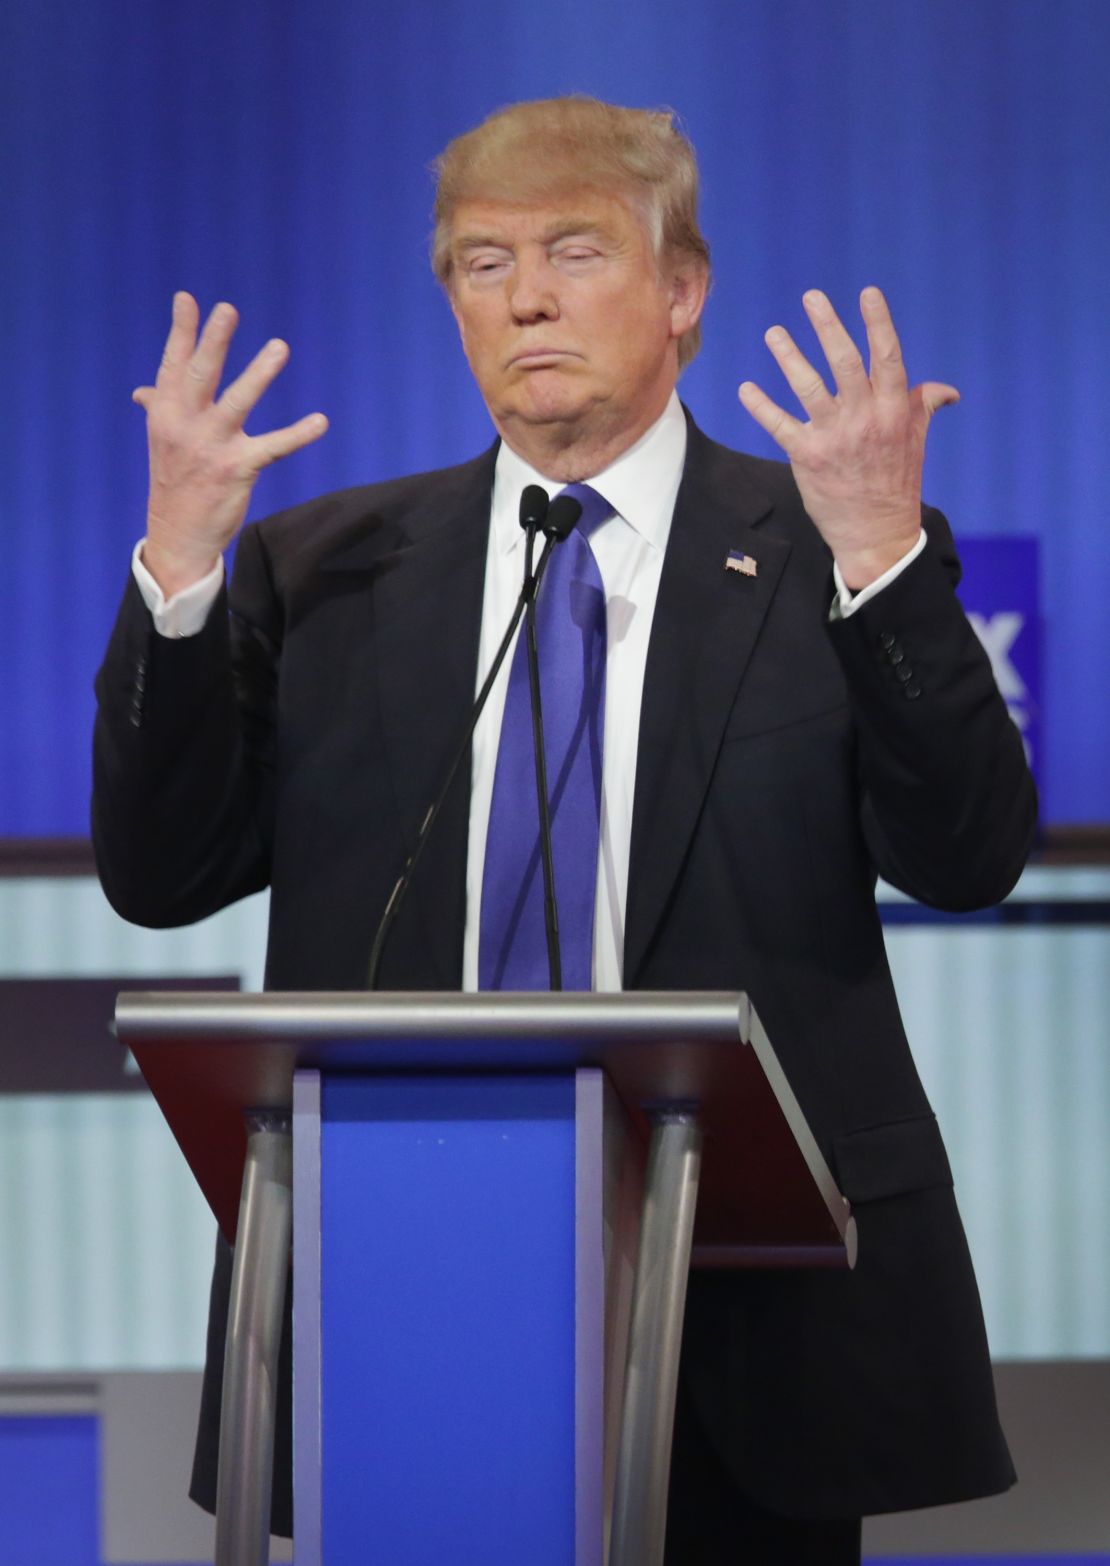 Republican candidate Donald Trump reassures voters there was "no problem" with his hands or anything else for that matter